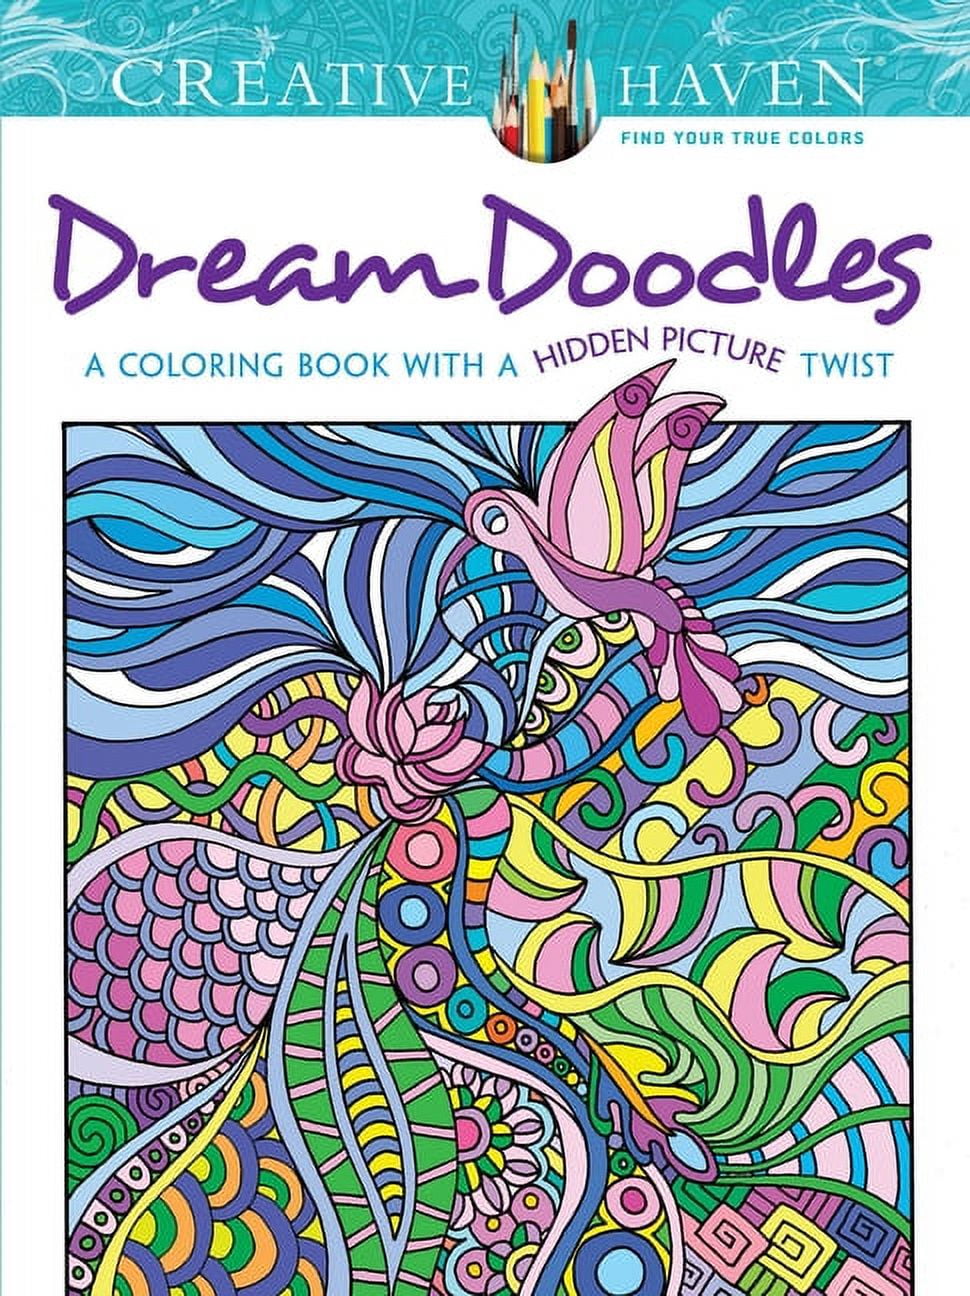 Set Of 2 Relax And Inspire / Calm and : Adult Coloring Book - Very